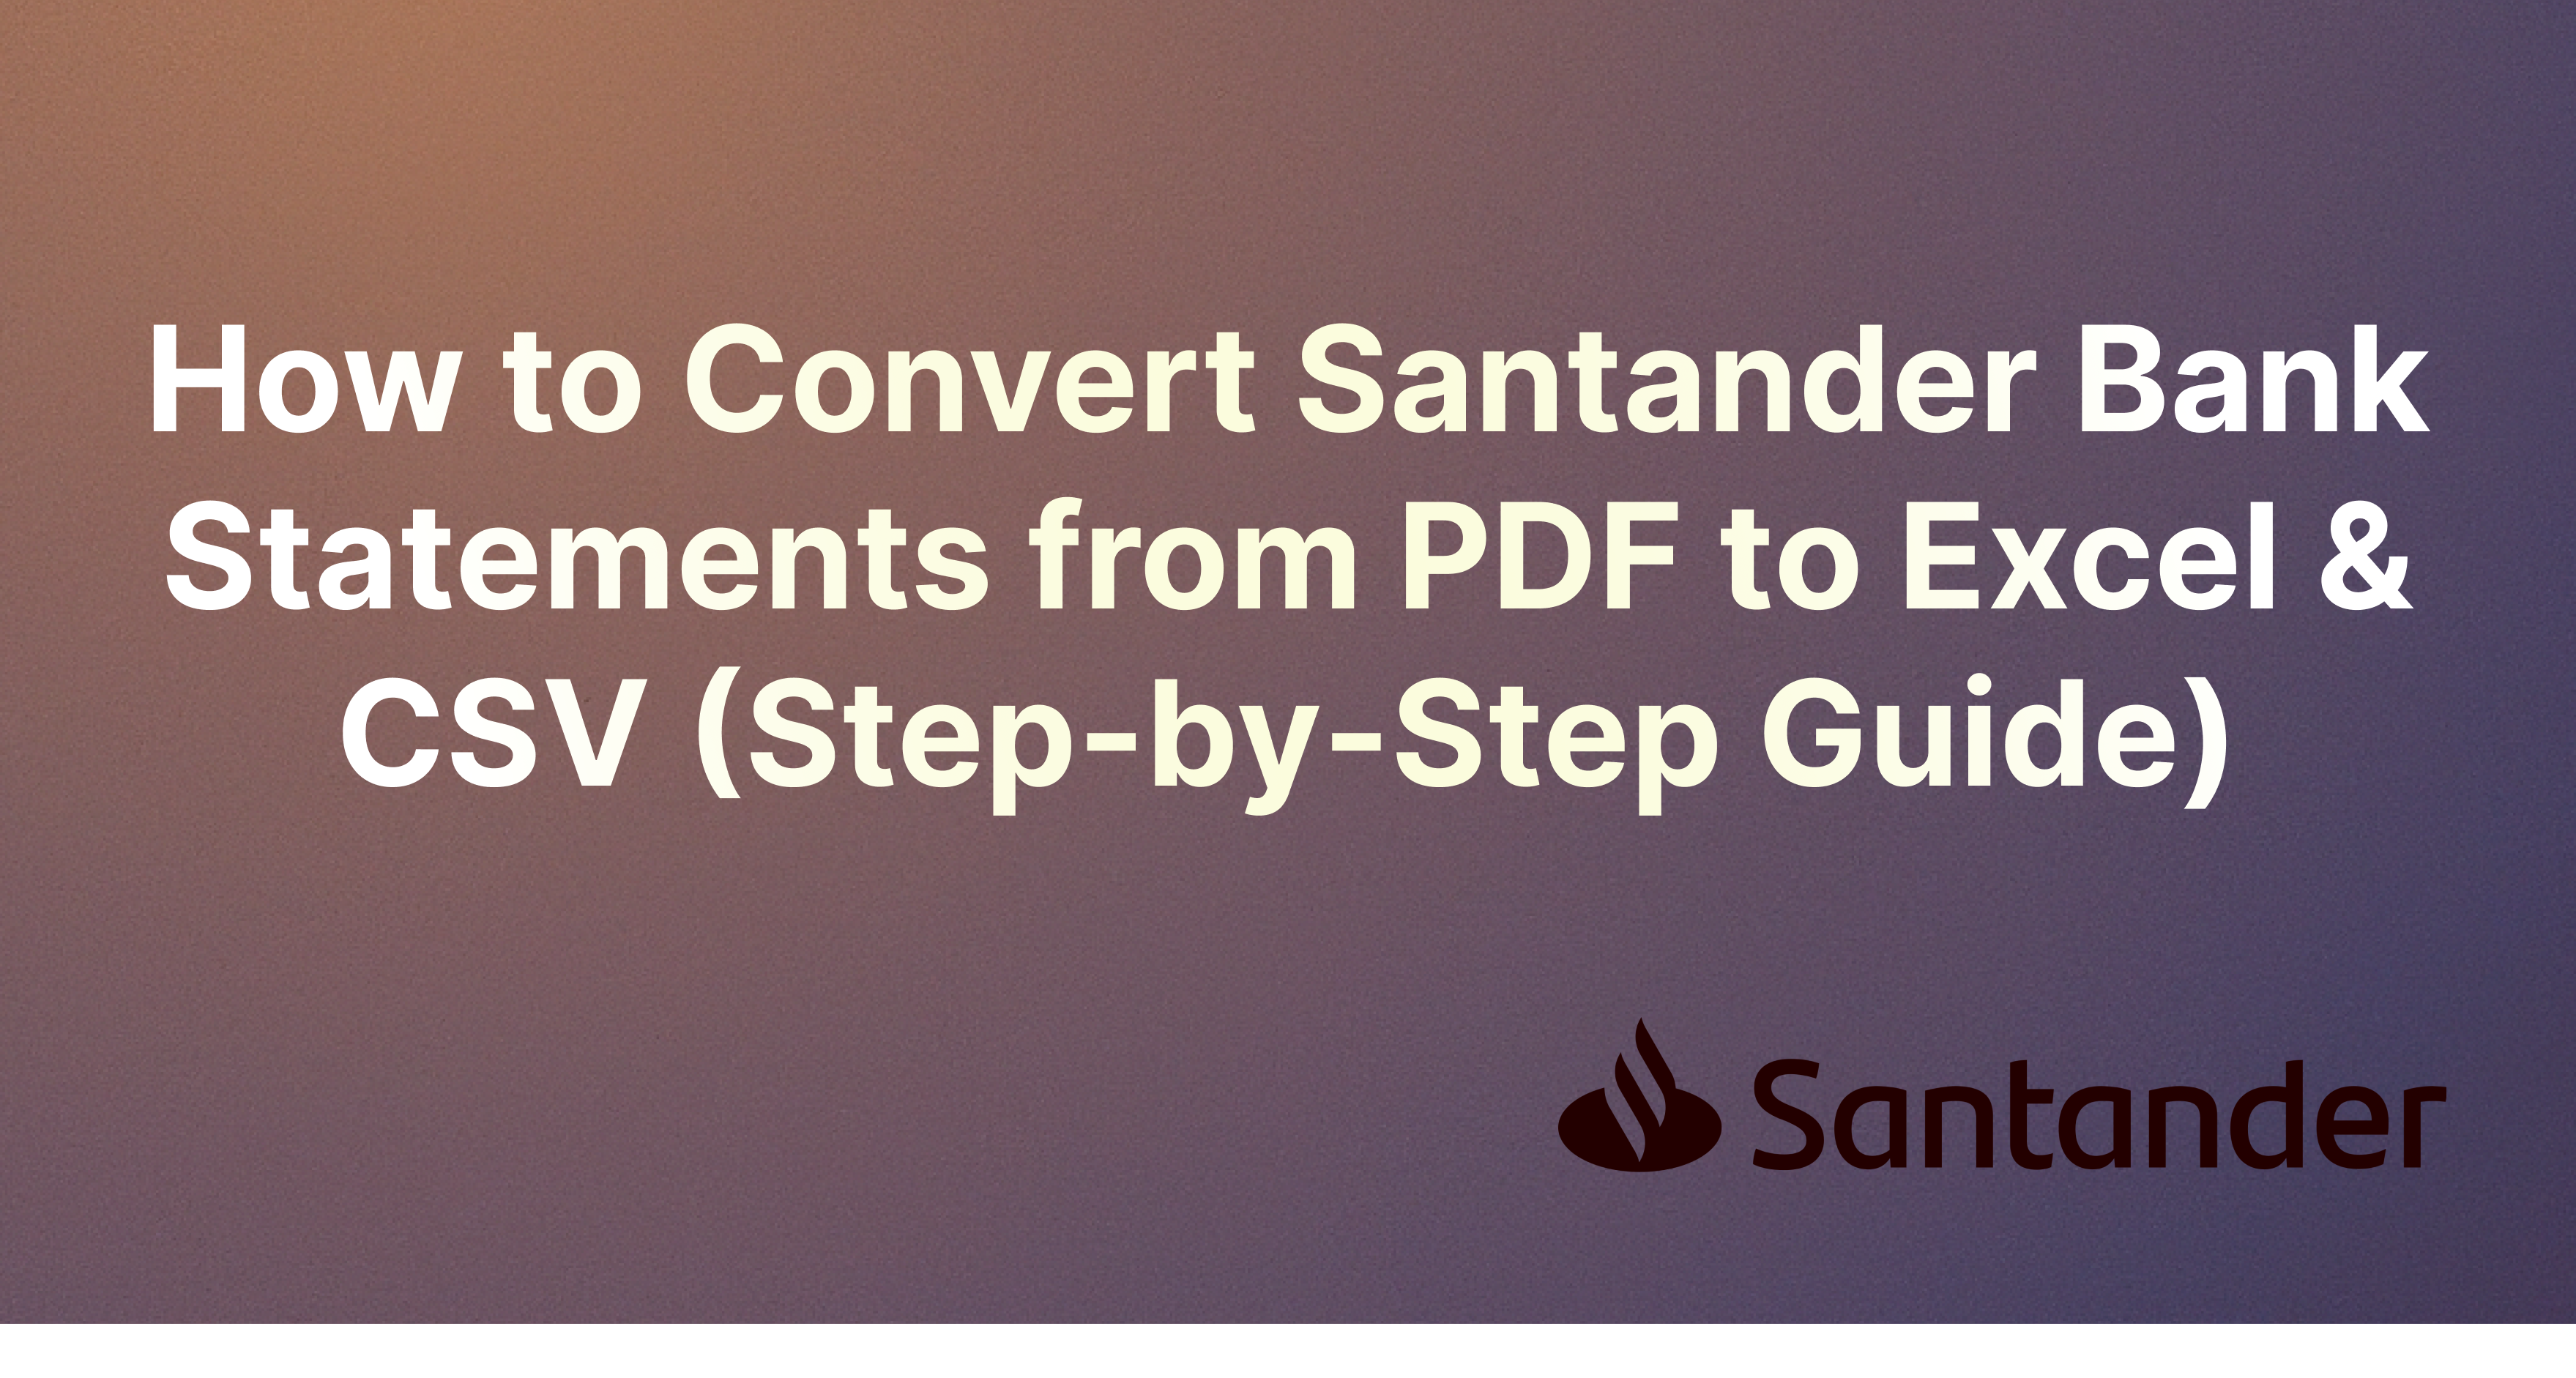 How to Convert Santander Bank Statements from PDF to Excel & CSV (Step-by-Step Guide)